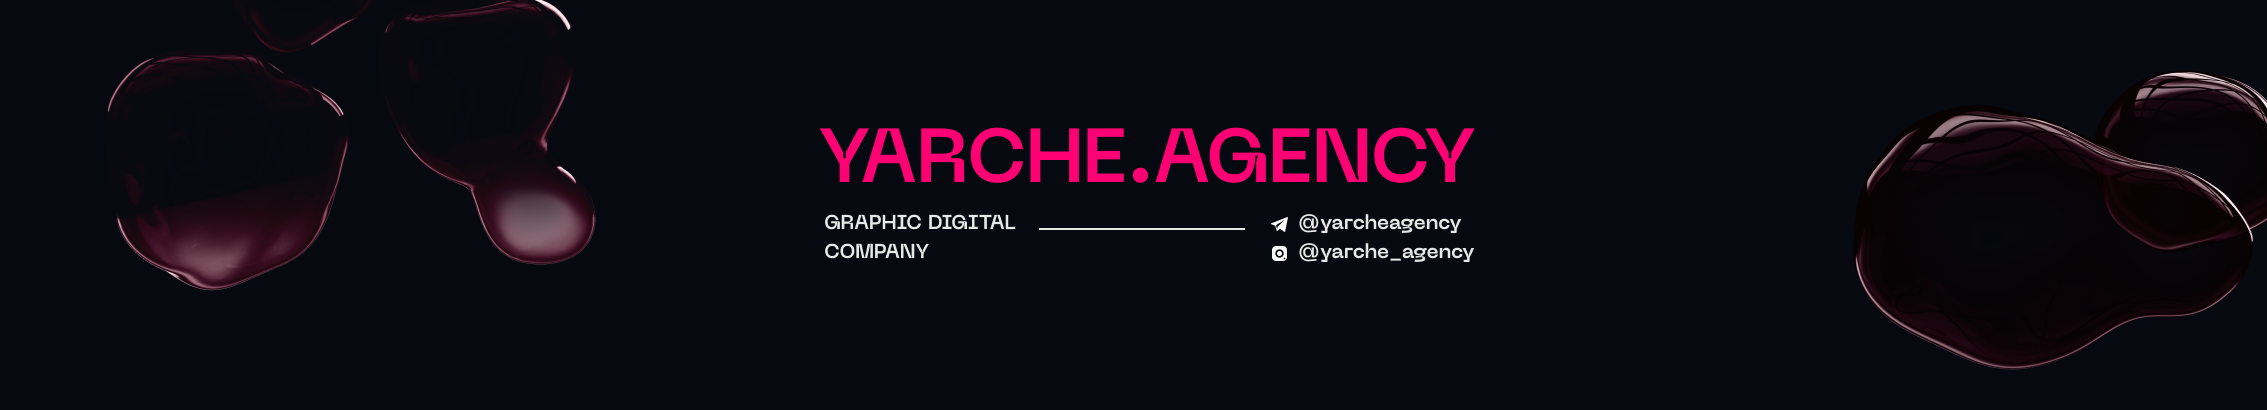 YARCHE AGENCY's profile banner